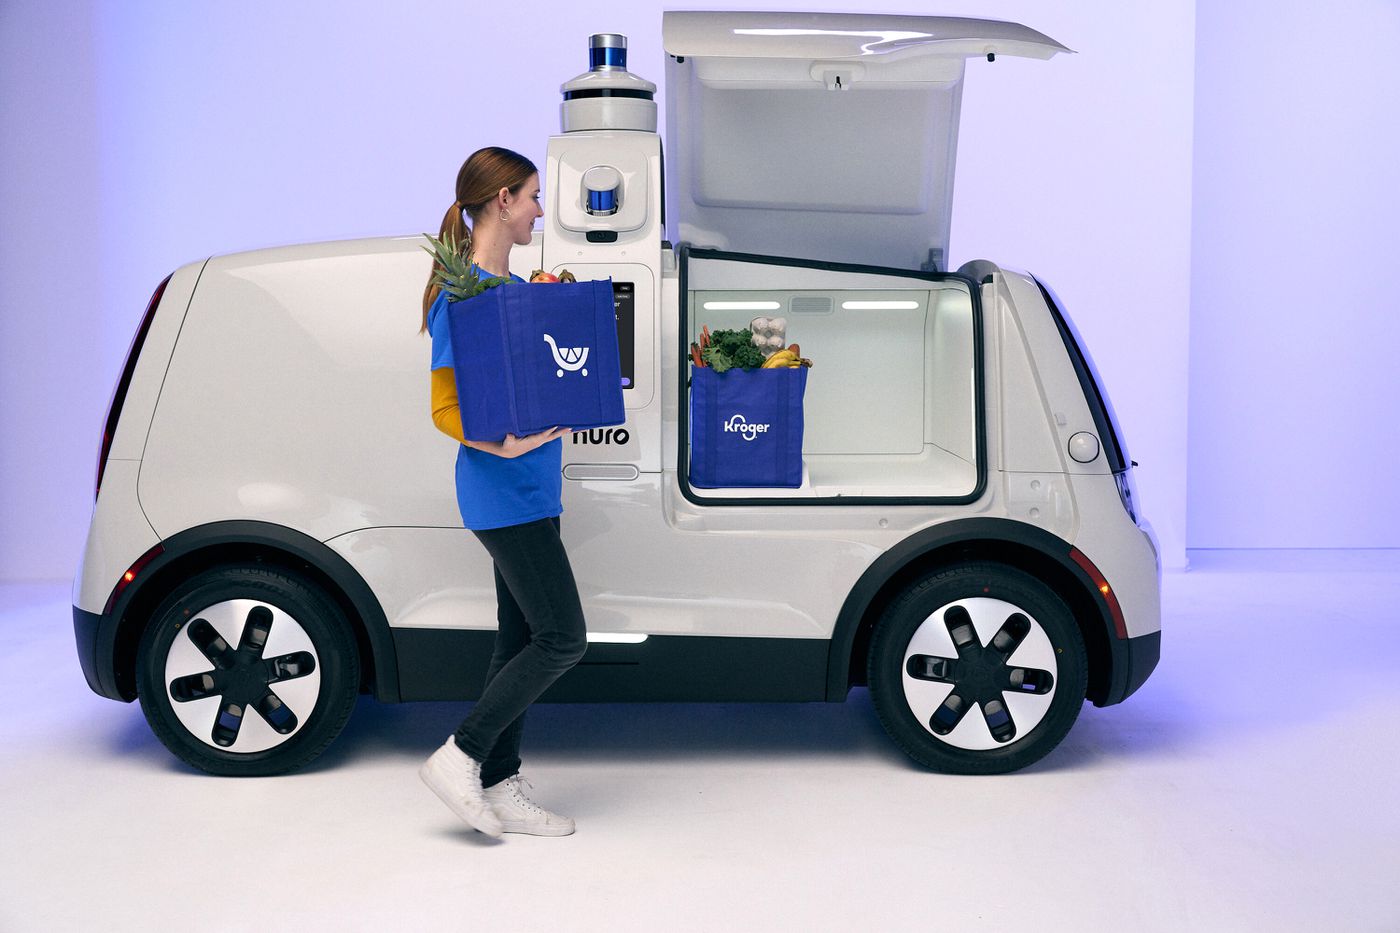 nuro gets a leg up from arm in launching its third-generation delivery robot